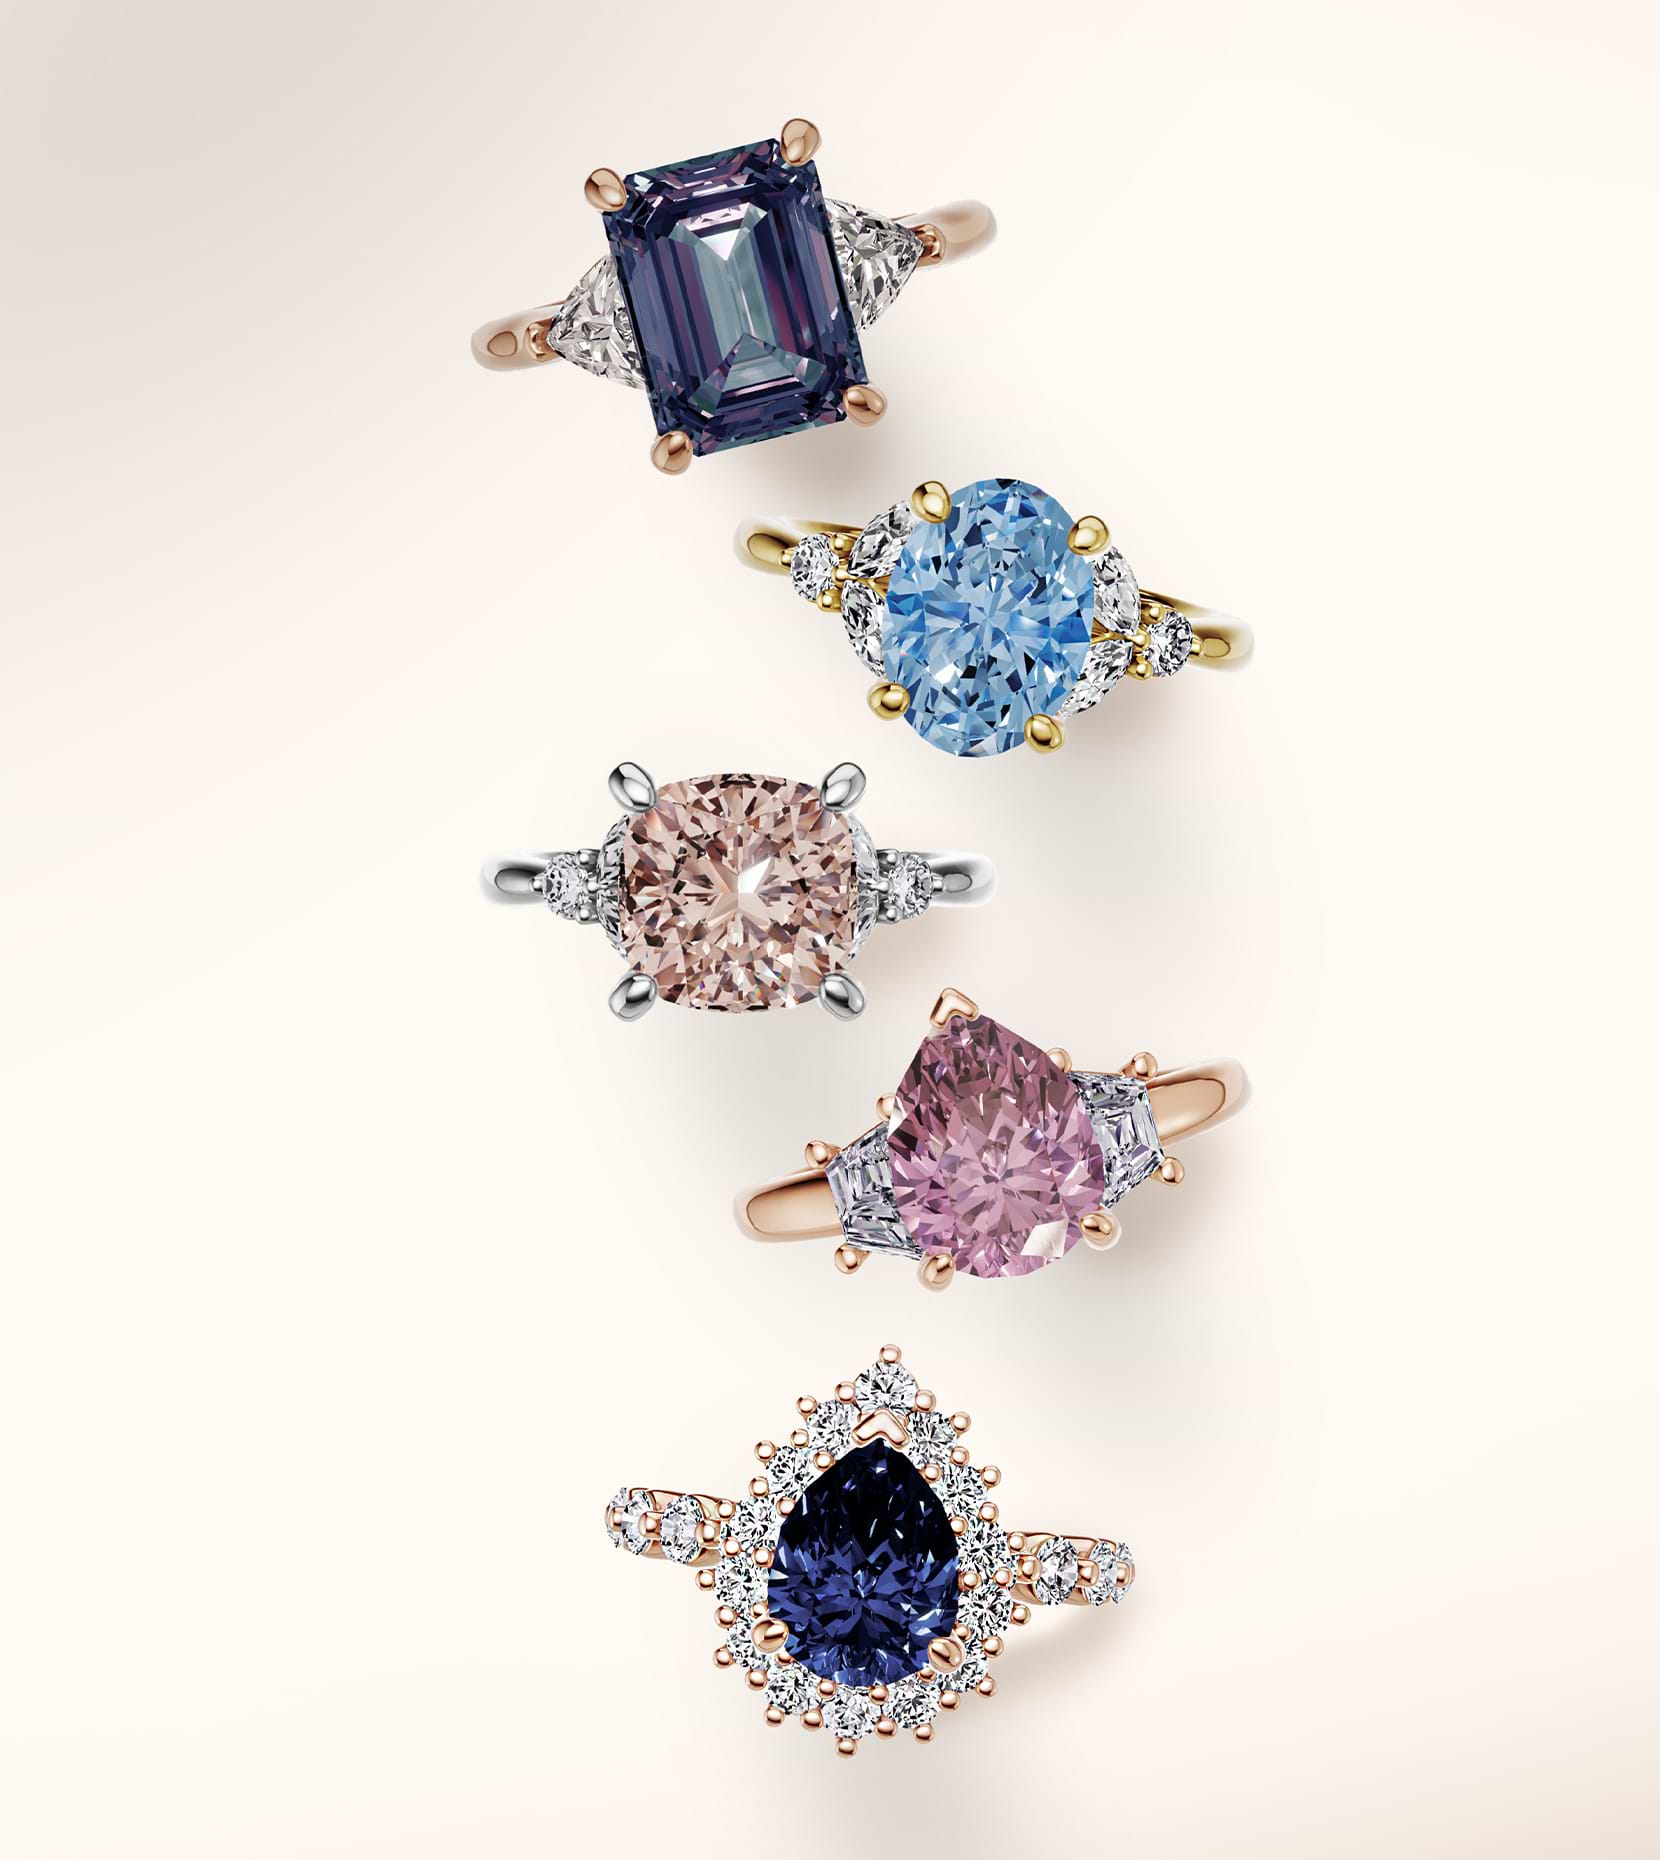 Create the gemstone ring that matches your vibe.